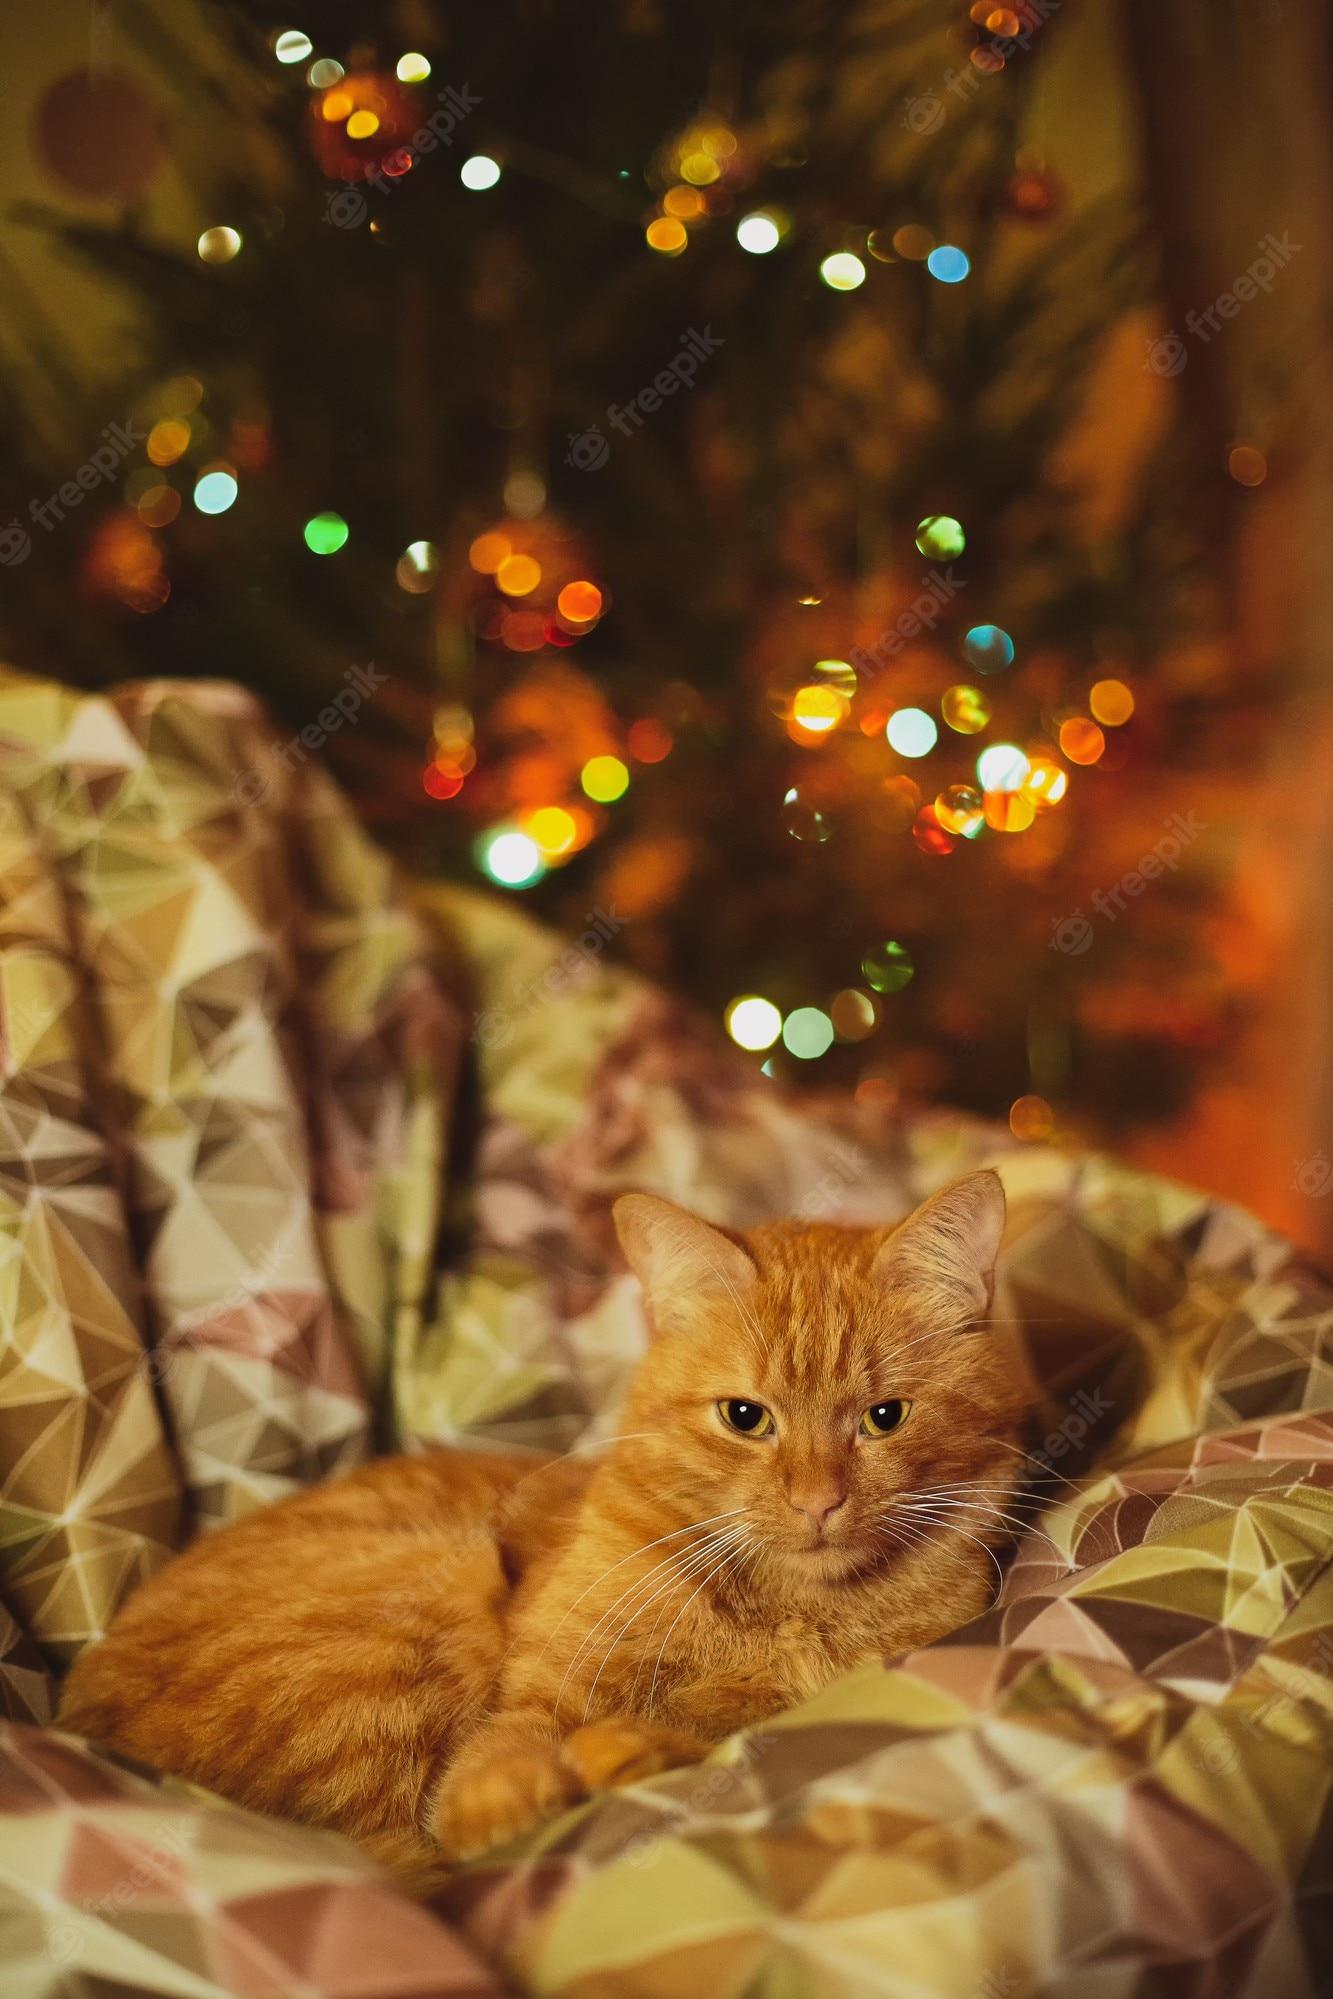 Photo A Domestic Cat Relaxing On Cozy Couch With